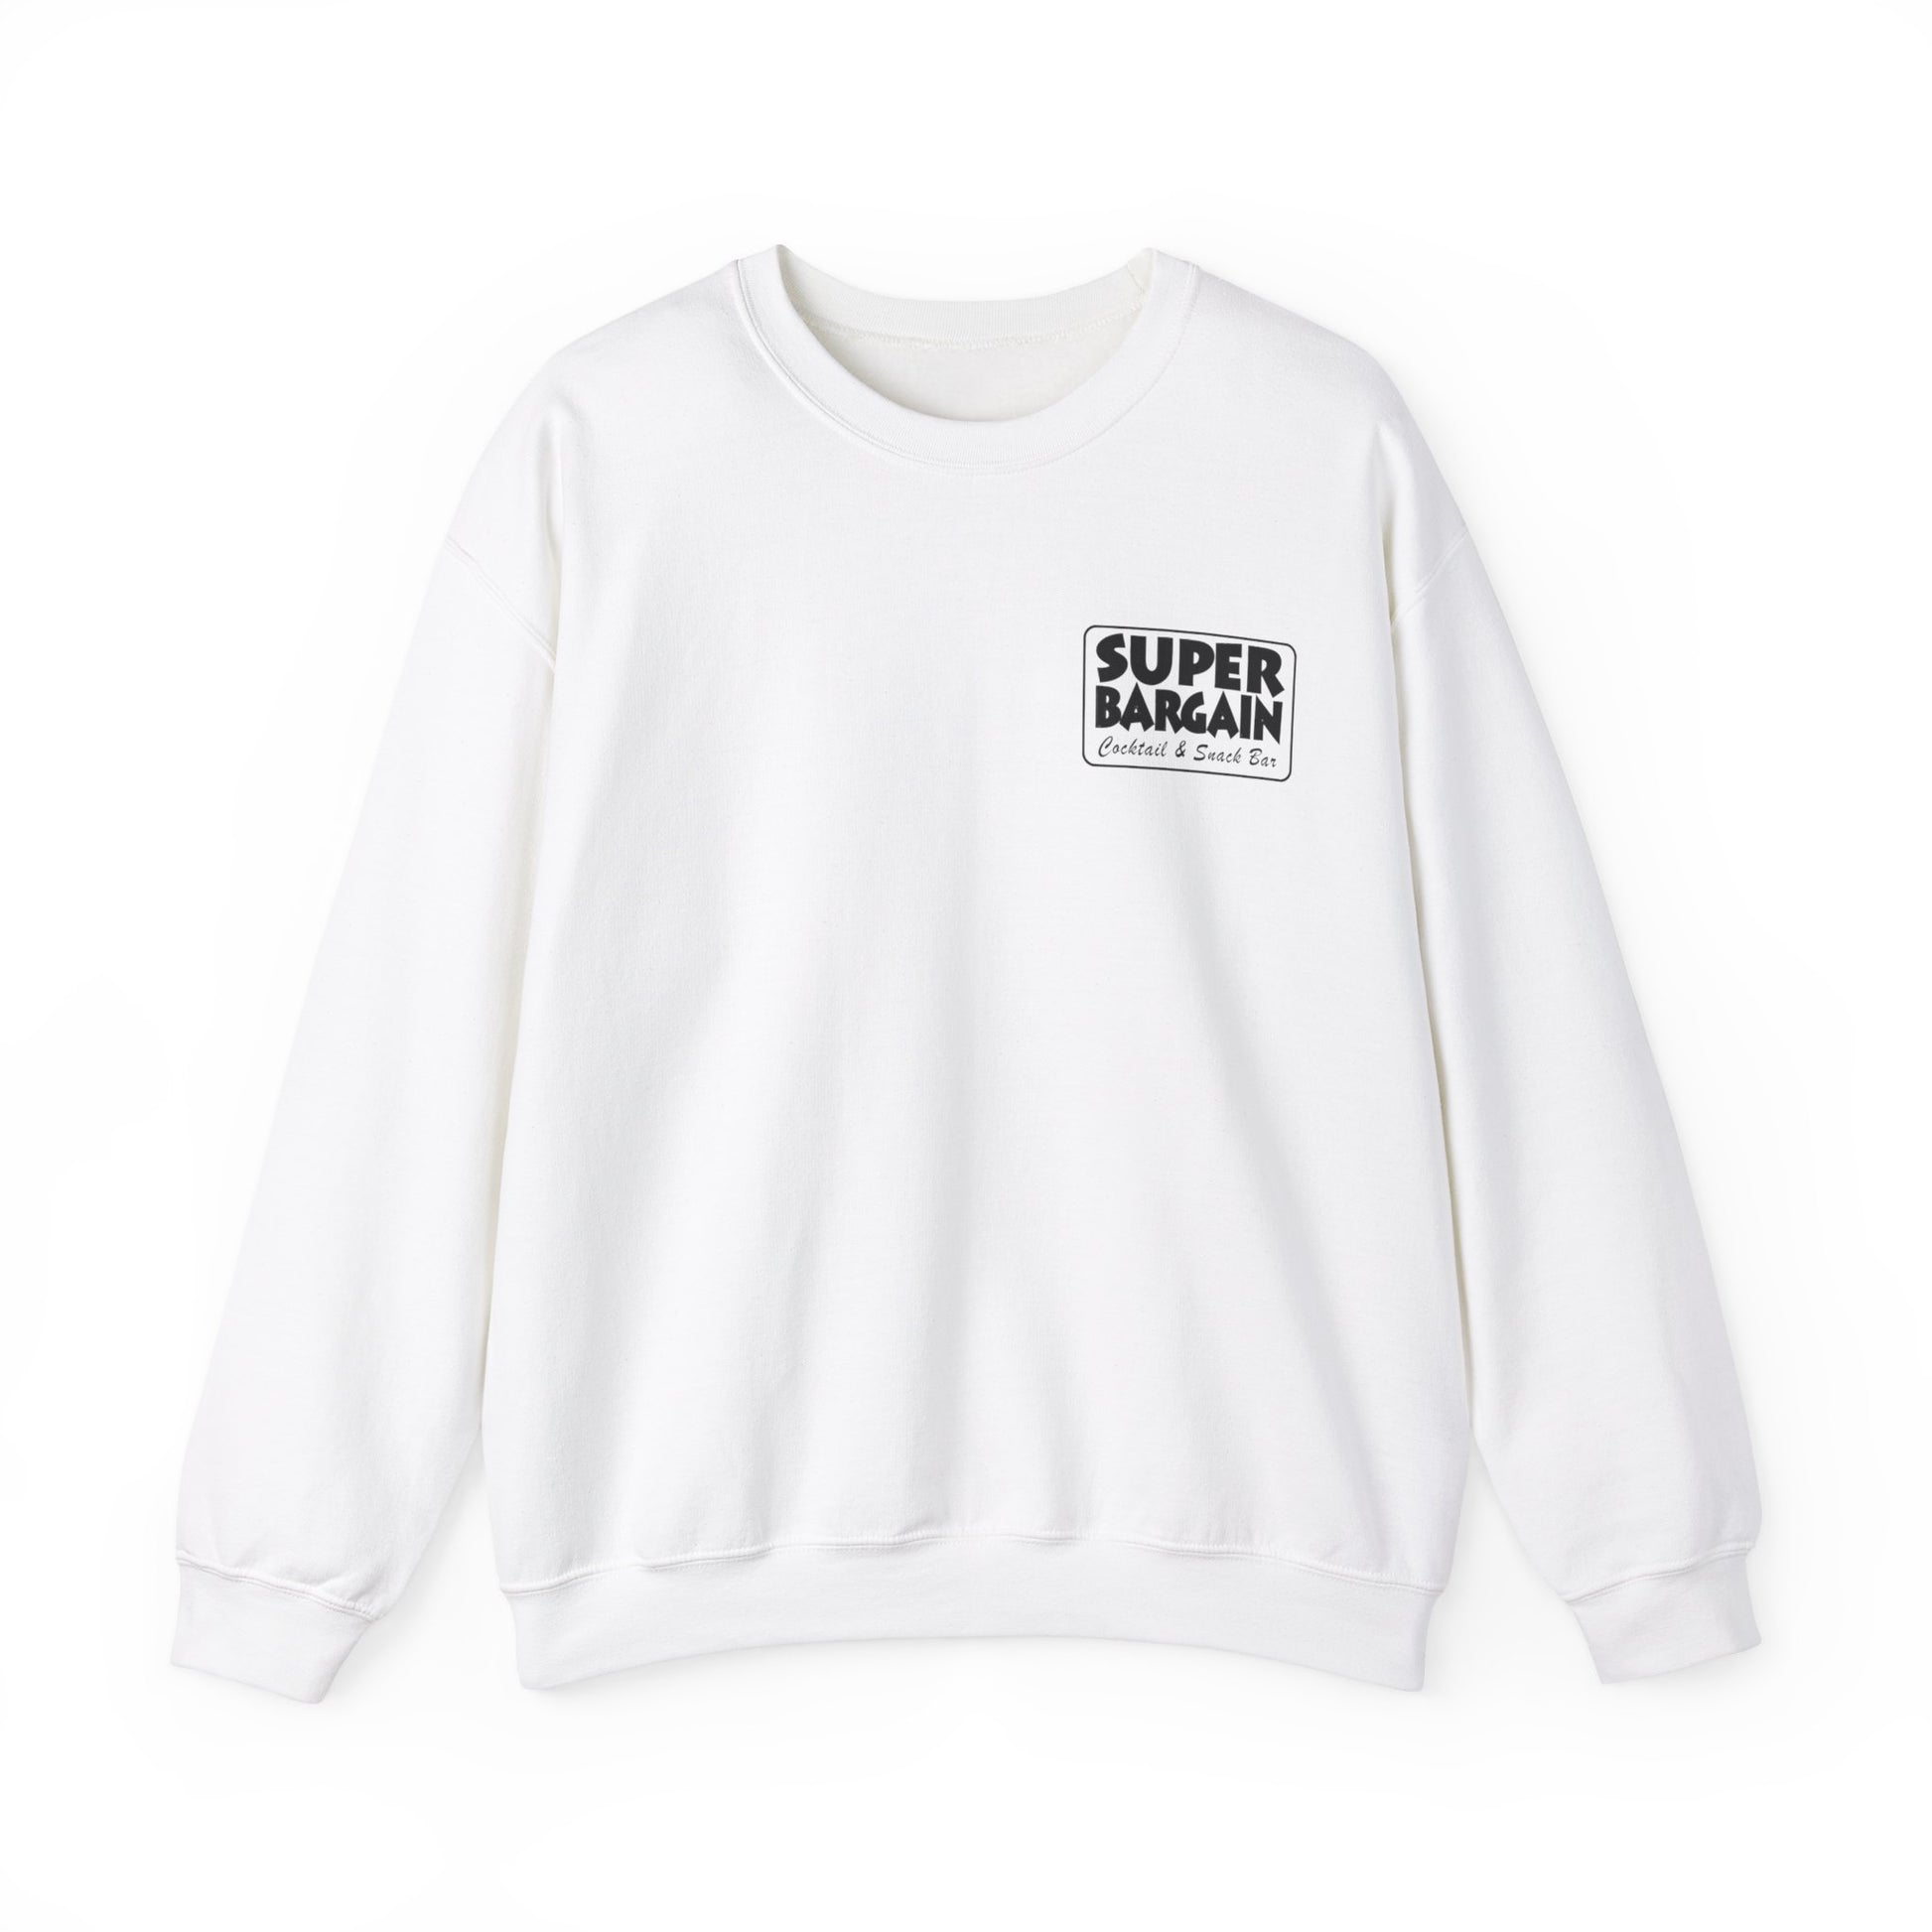 A plain white Unisex Heavy Blend™ Crewneck Monochrome Logo Sweatshirt with long sleeves and a crew neck, featuring a small black and white logo that says "SUPER BARGAIN SALE" on the left chest area, displayed on a white background. This item is available exclusively in Toronto's Cabbagetown district.